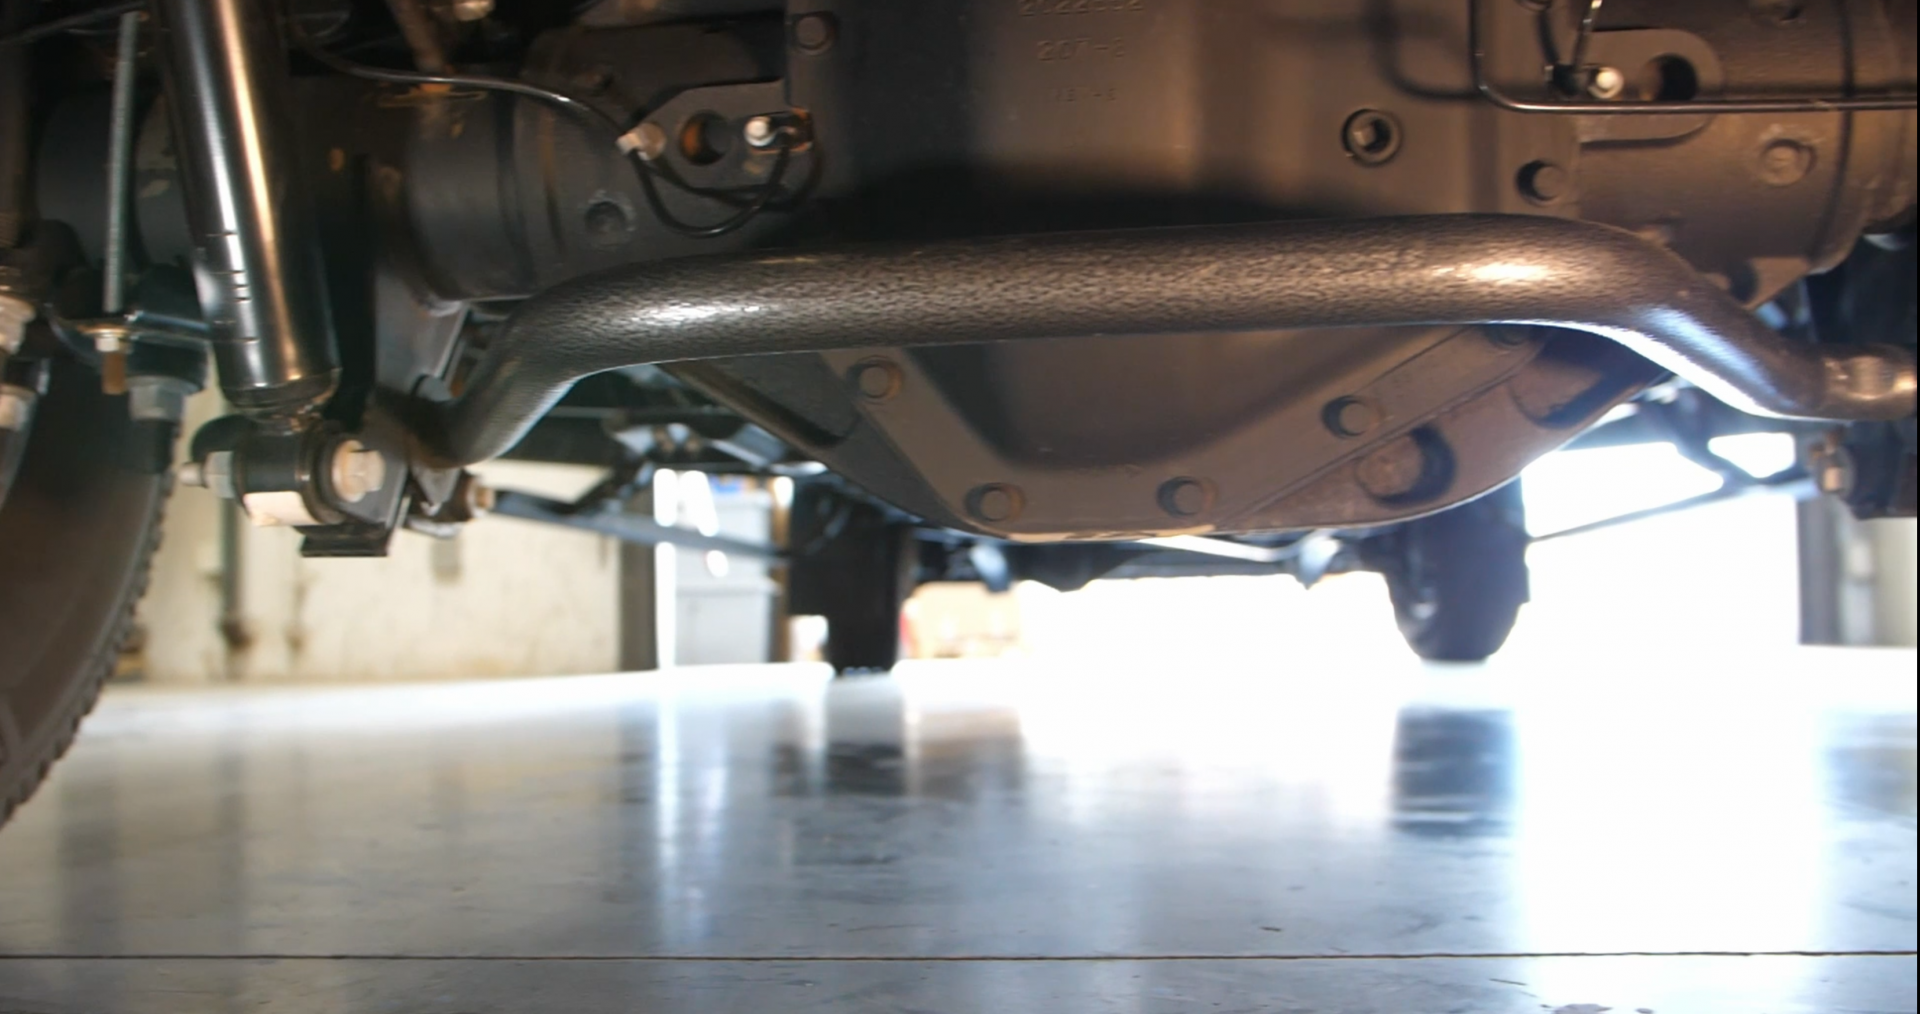 sway bar on rear of vehicle